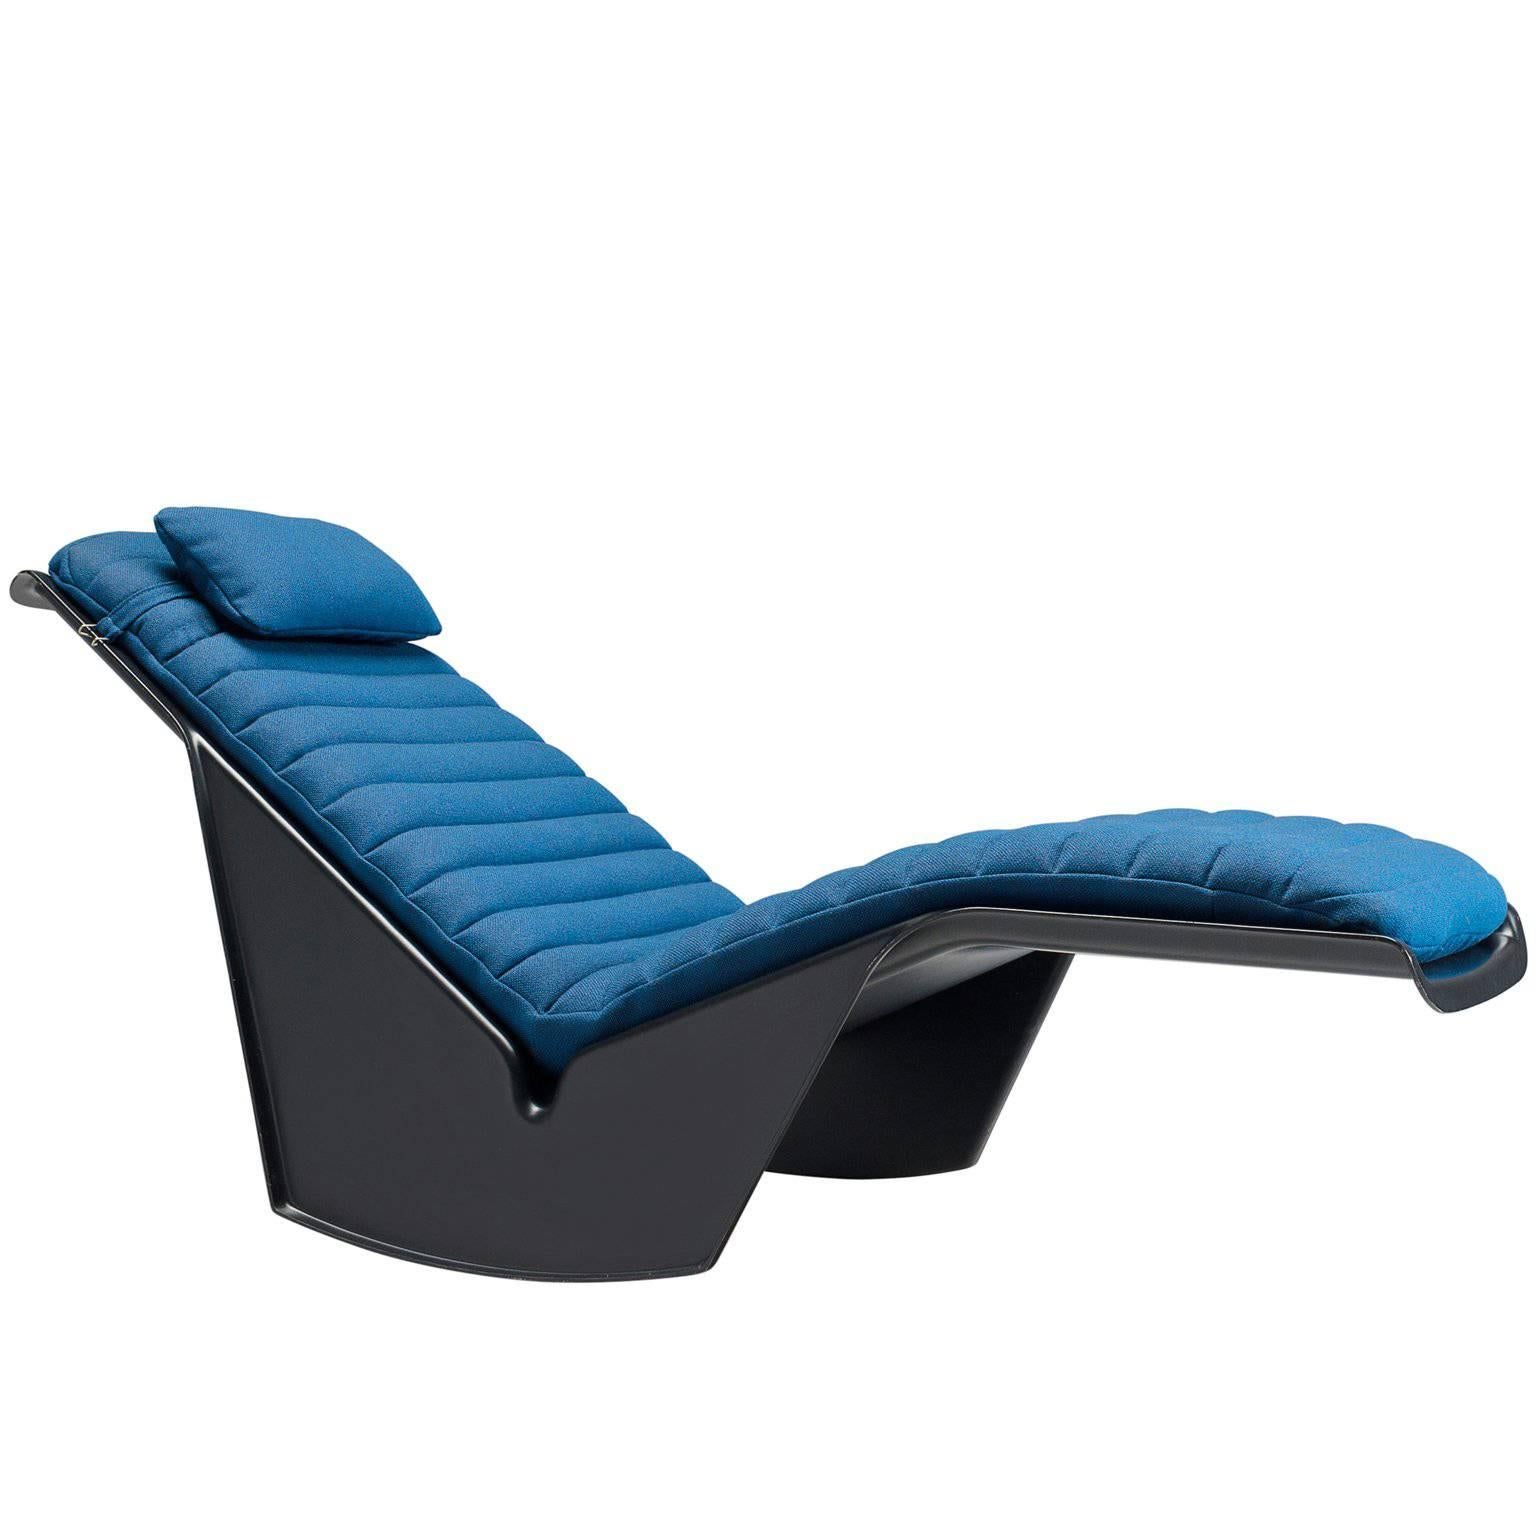 'Serpentina' Rocking Lounge Chair by Burchard Vogtherr